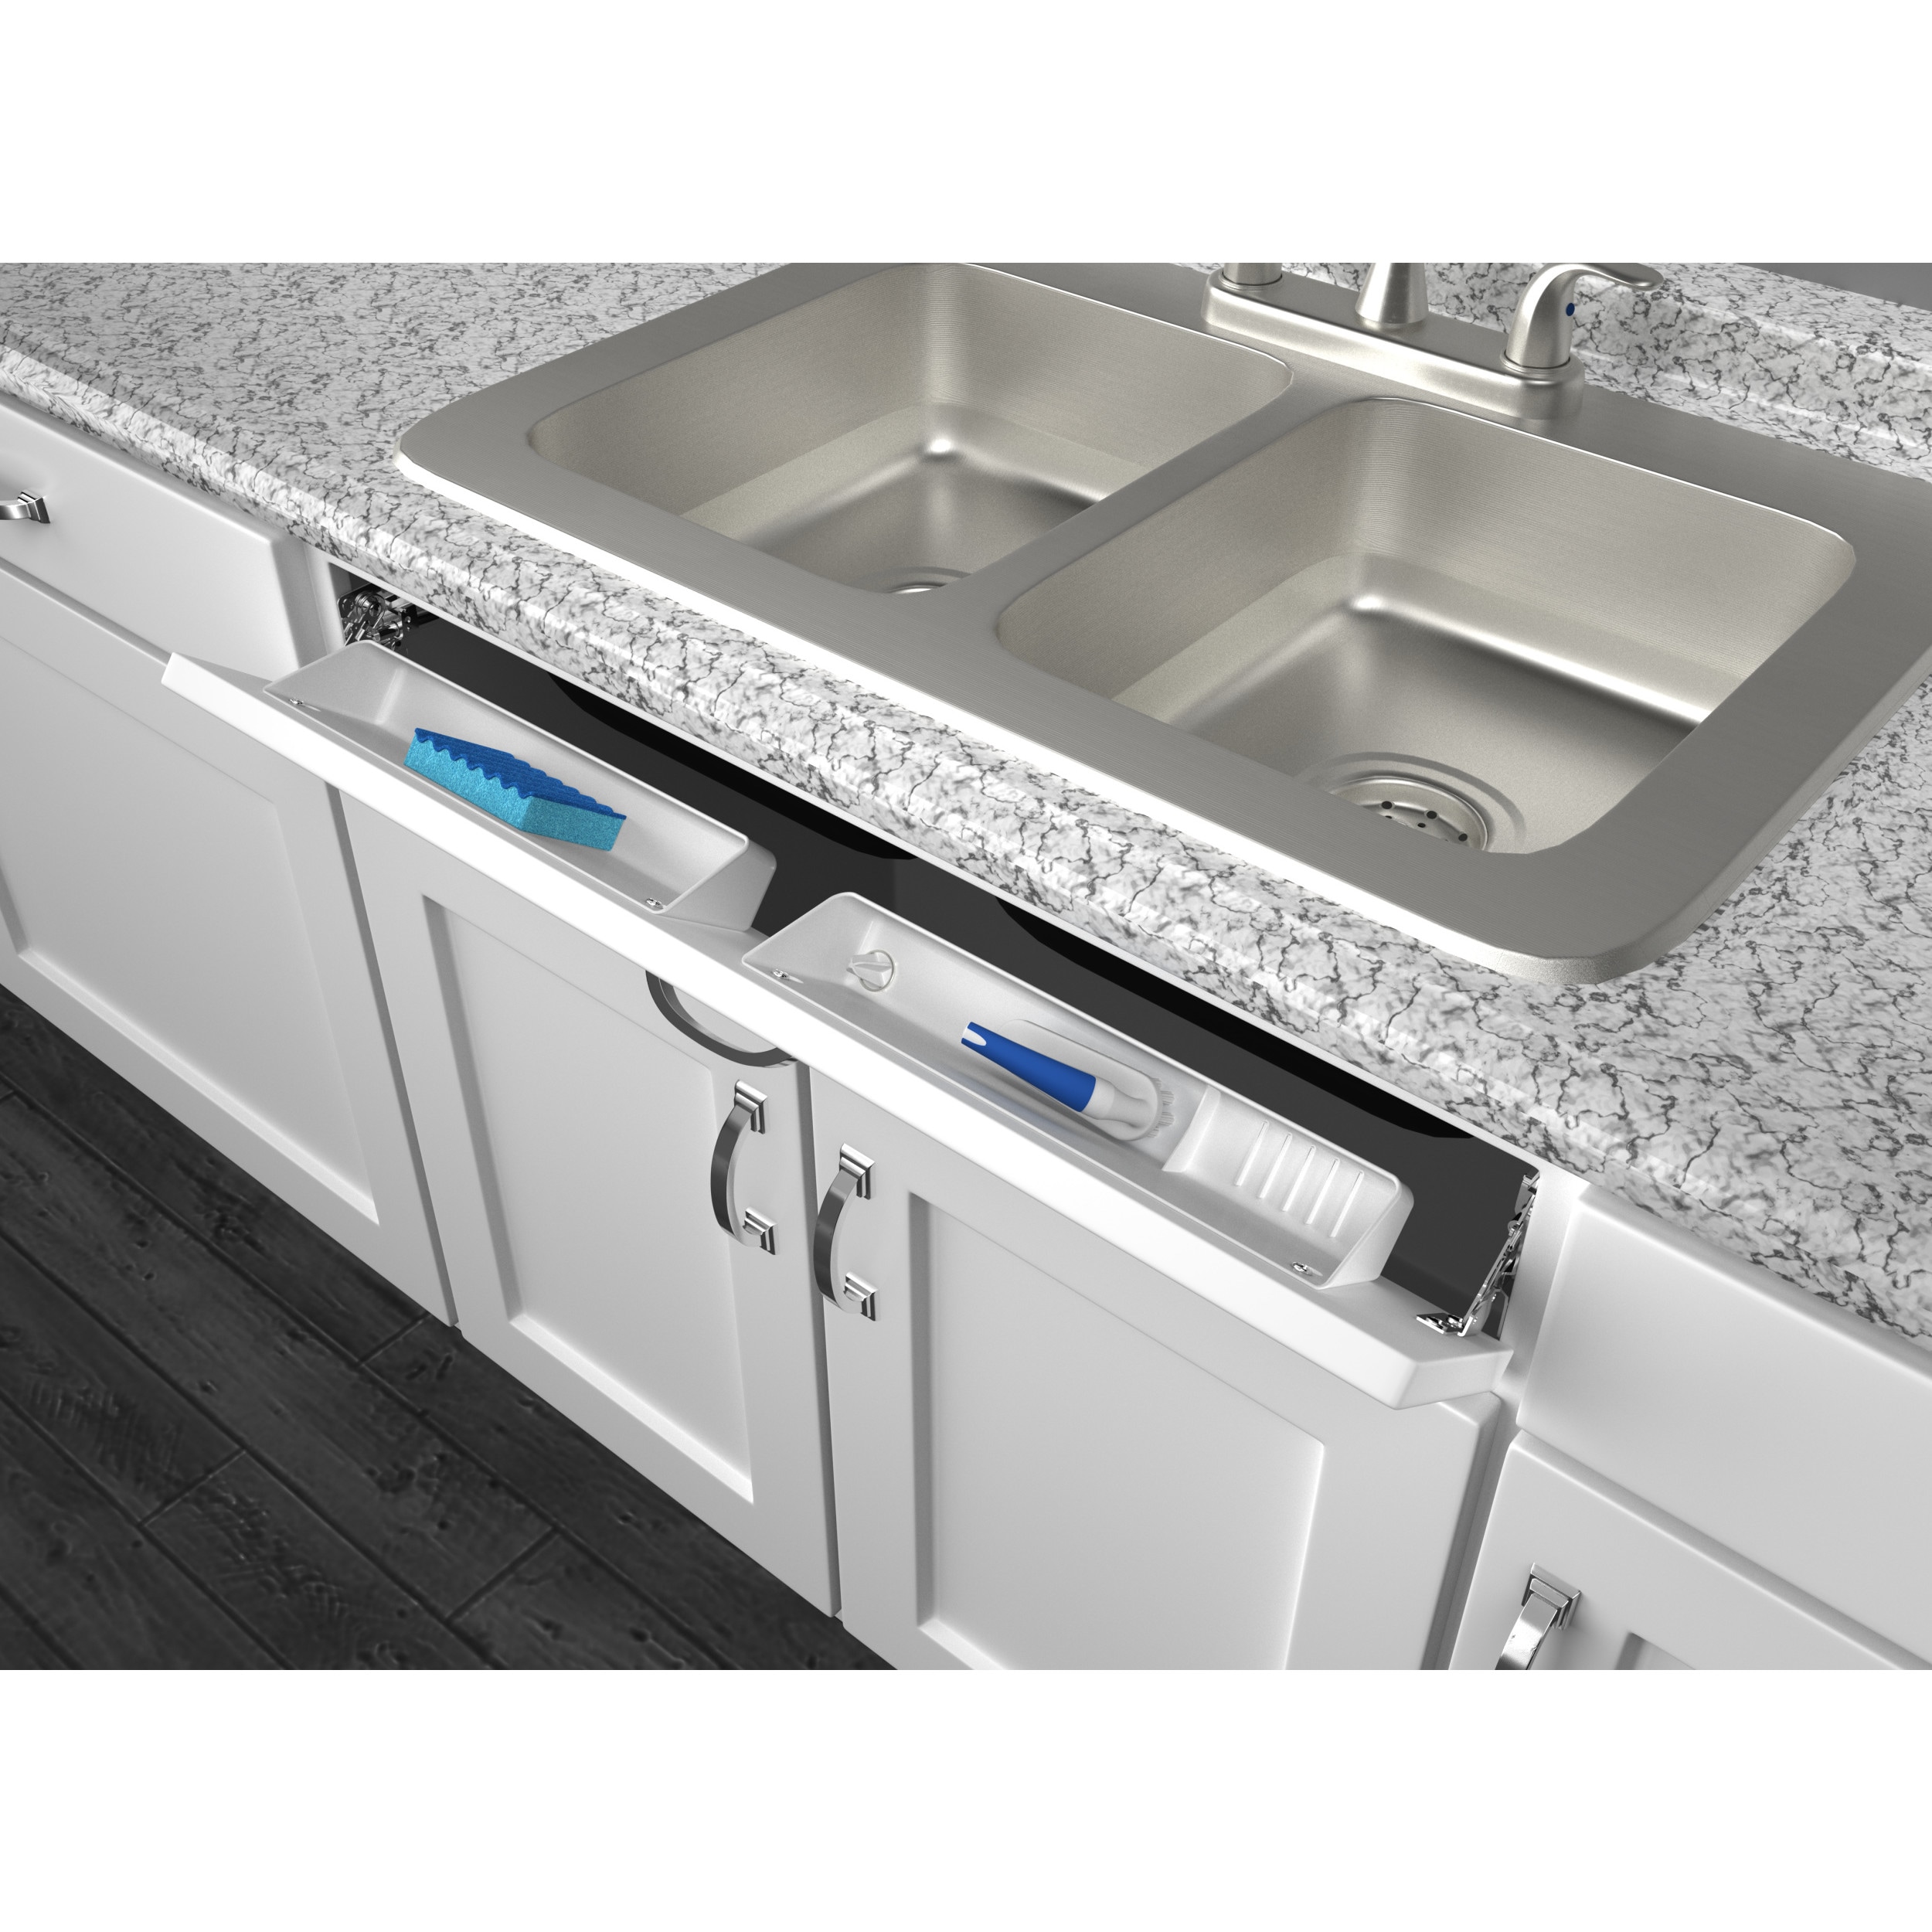 1 Plastic Sink Tip-Out Tray, 8-5/8 PSF8 - HANDYCT